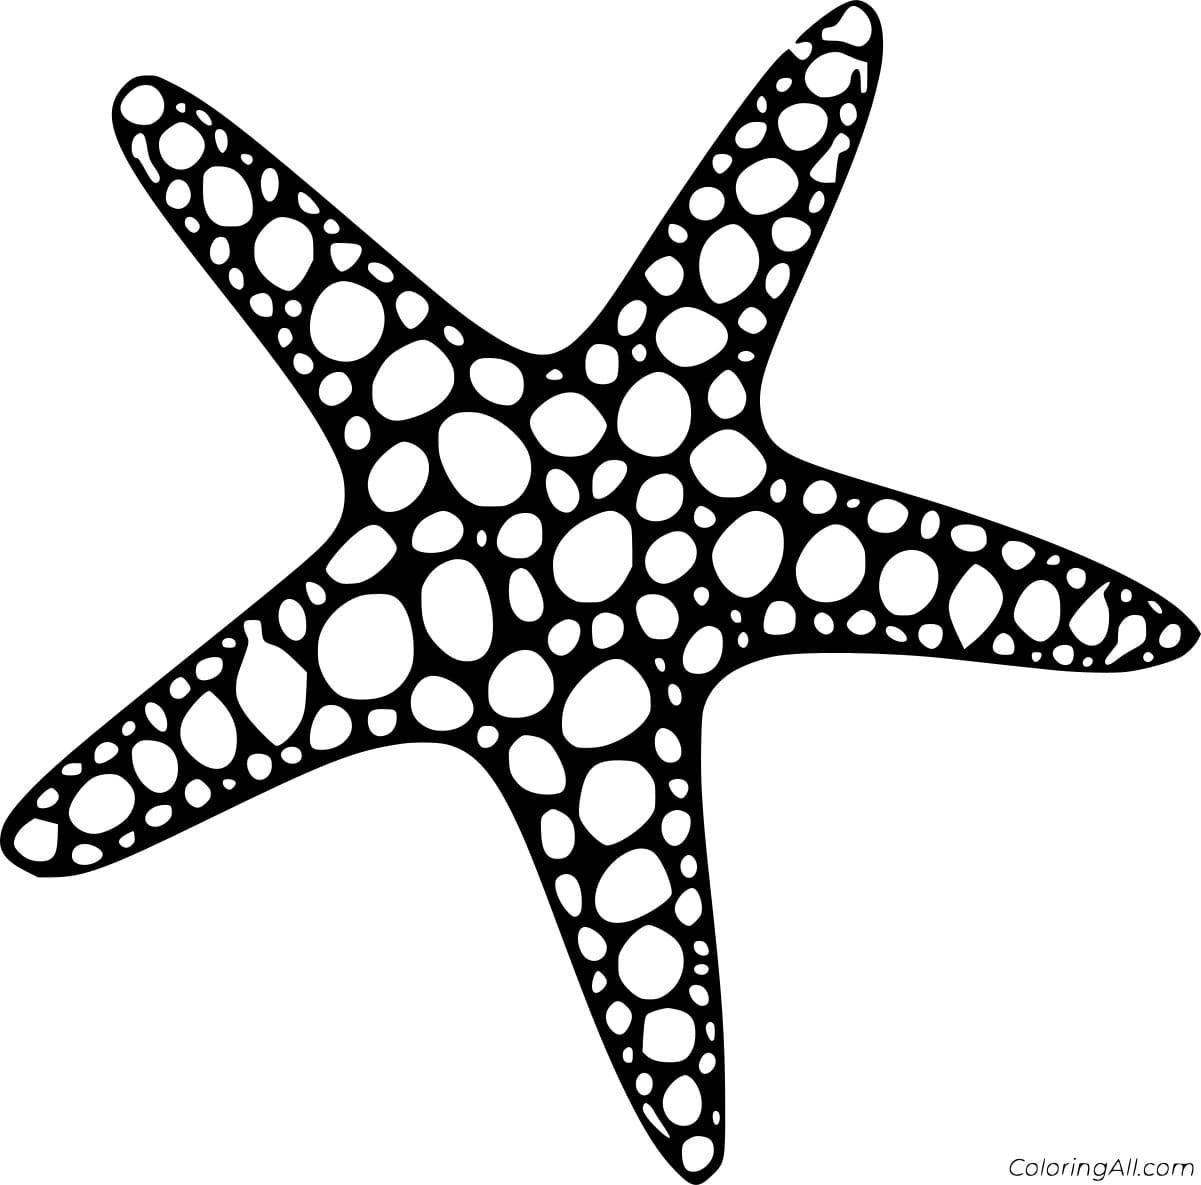 Coleman Nippled Star image Coloring Page